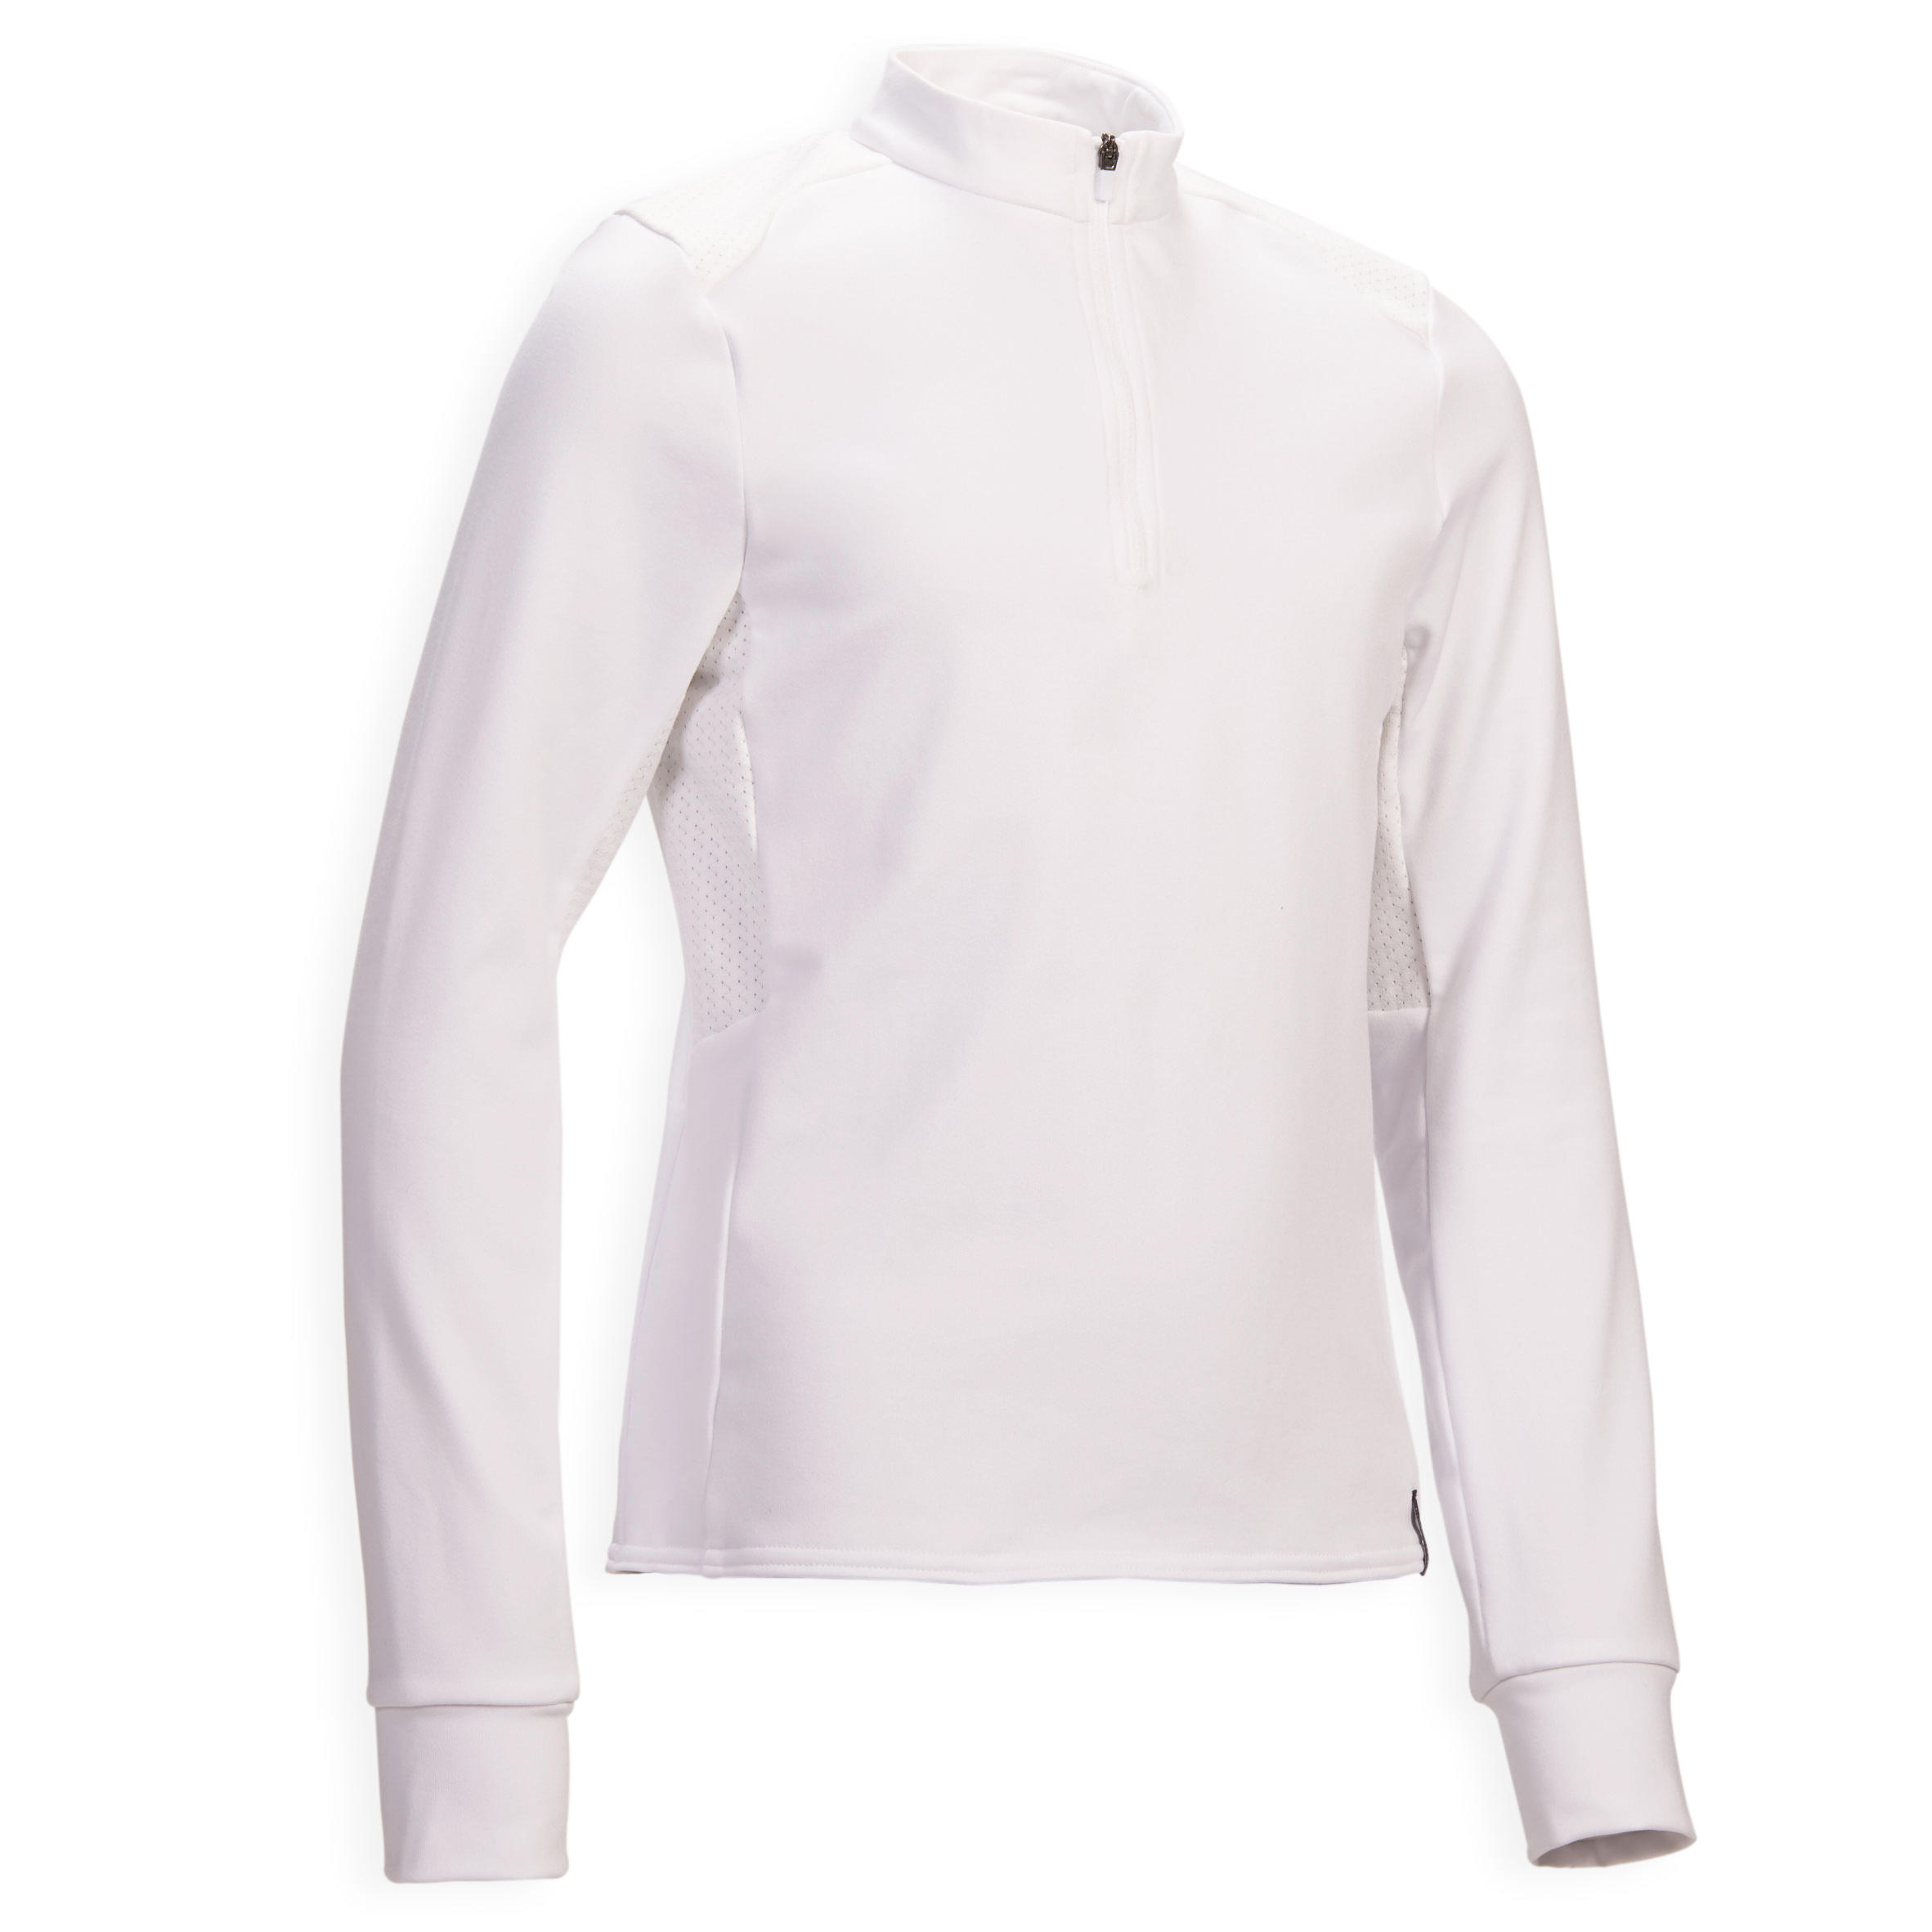 FOUGANZA Kids' Horse Riding Long-Sleeved Warm Competition Polo 500 - White